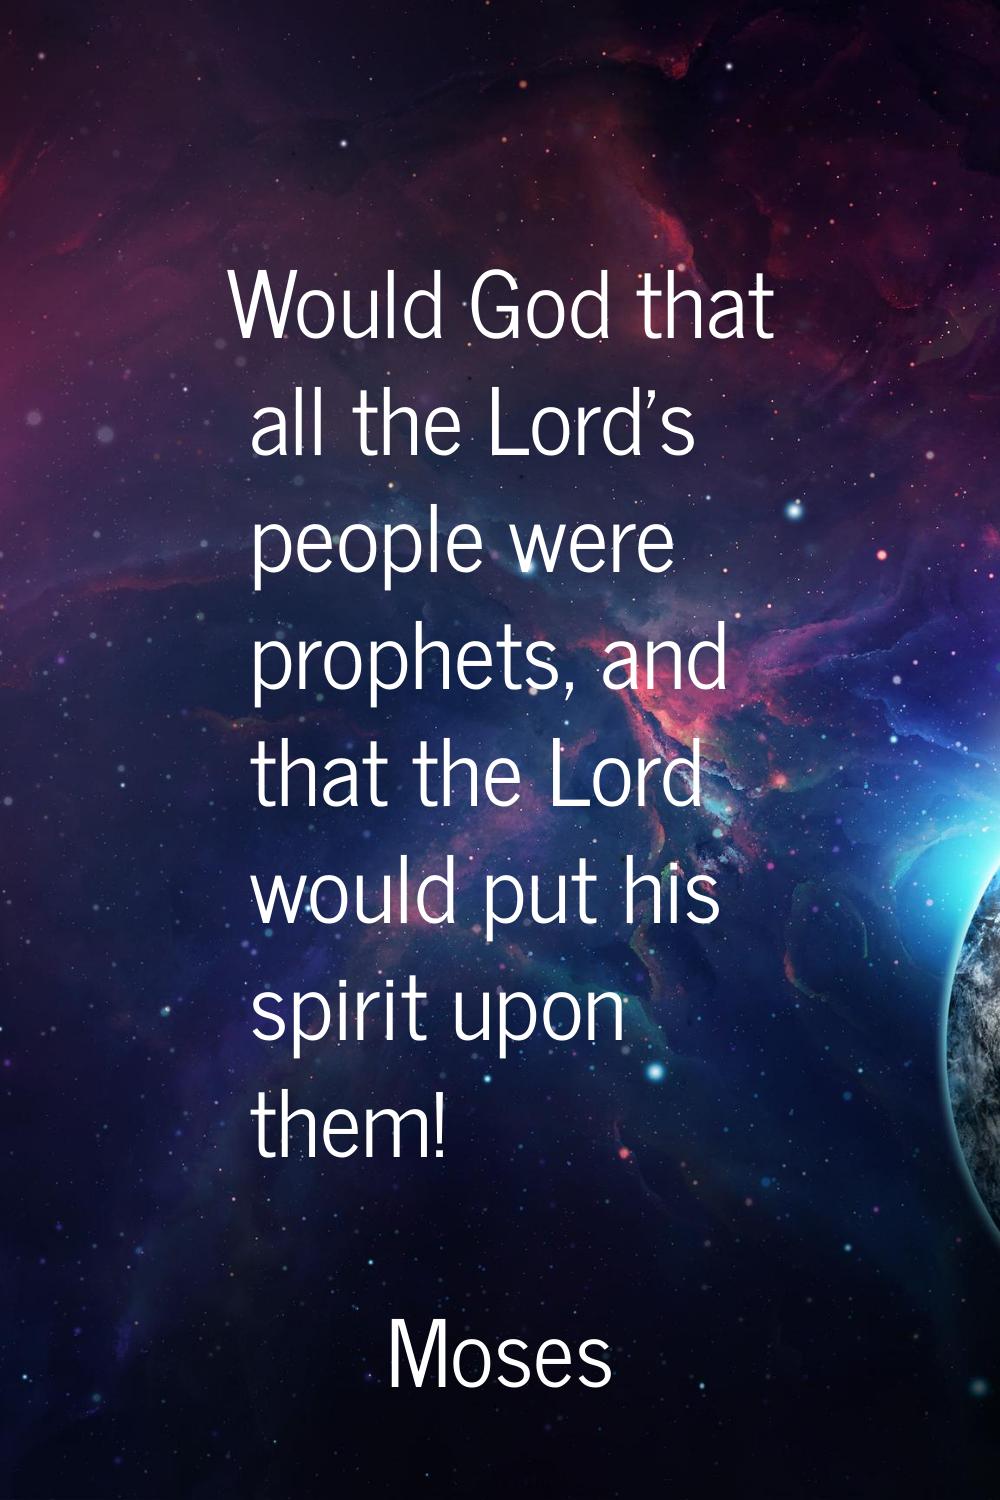 Would God that all the Lord's people were prophets, and that the Lord would put his spirit upon the